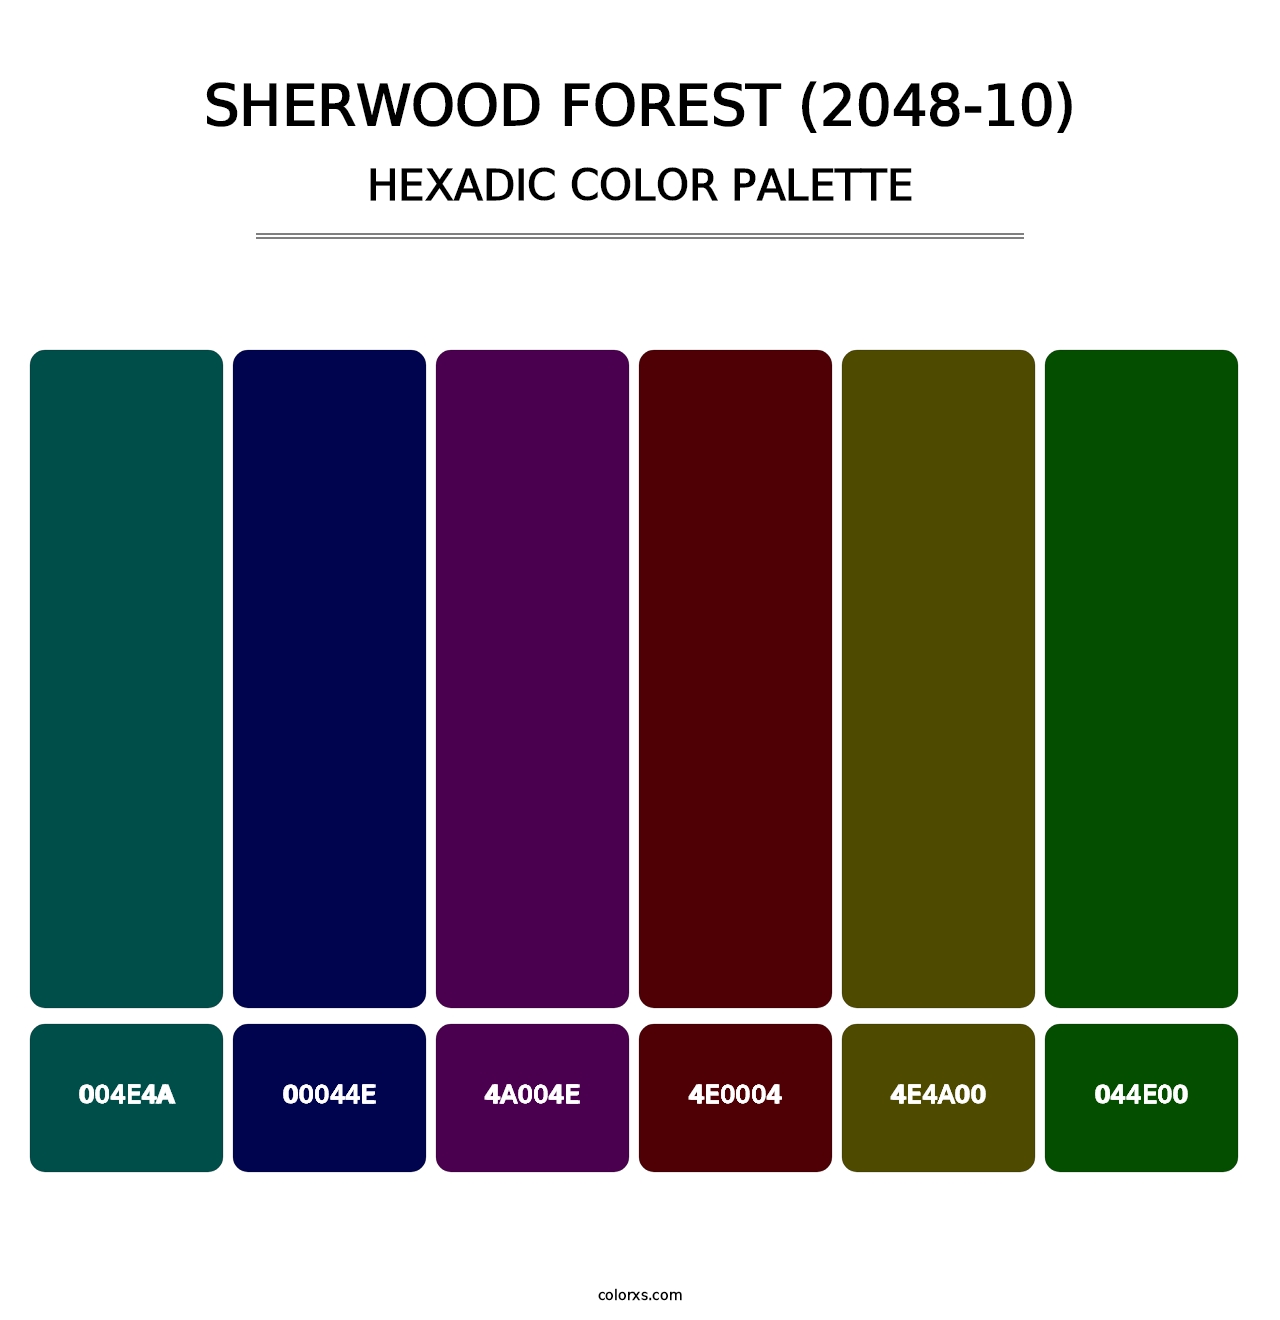 Sherwood Forest (2048-10) - Hexadic Color Palette